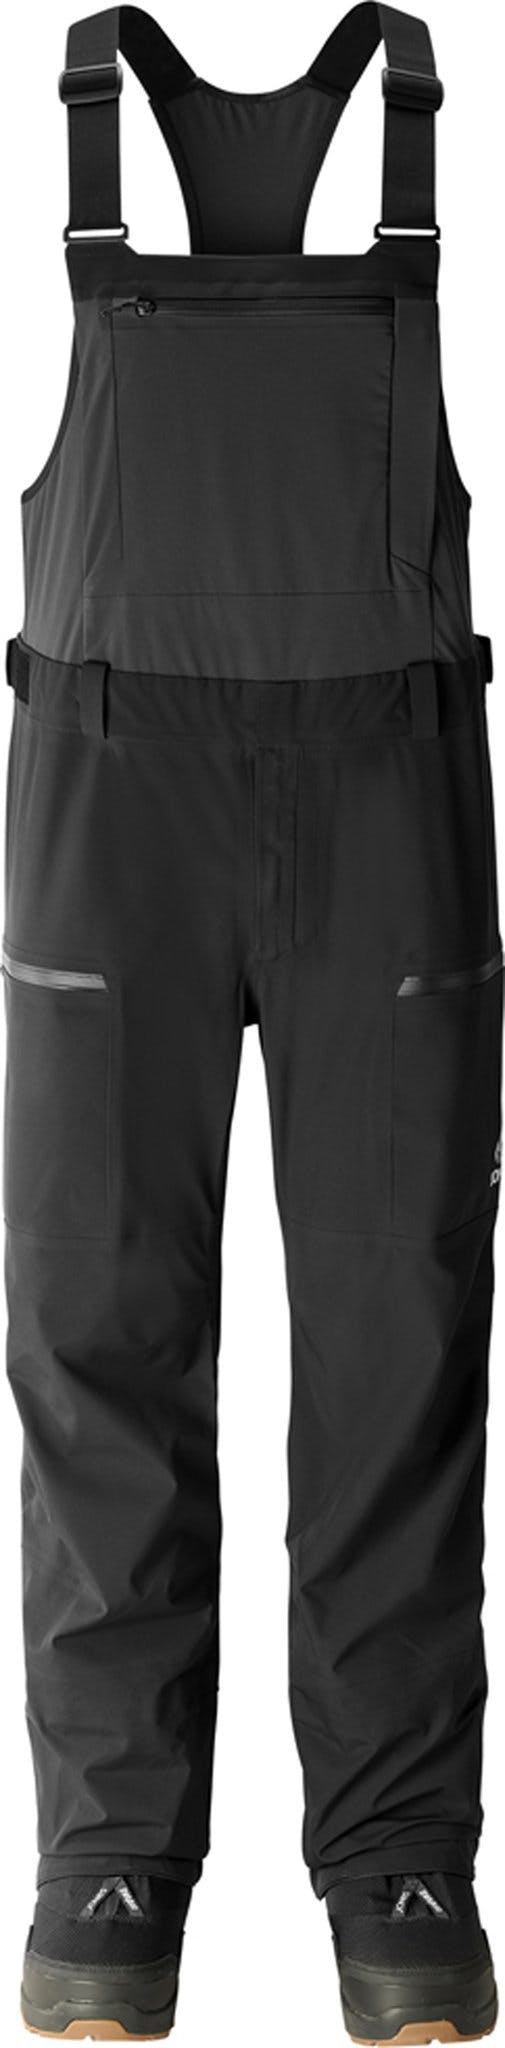 Product image for Shralpinist Stretch Recycled Bib Pant - Men's